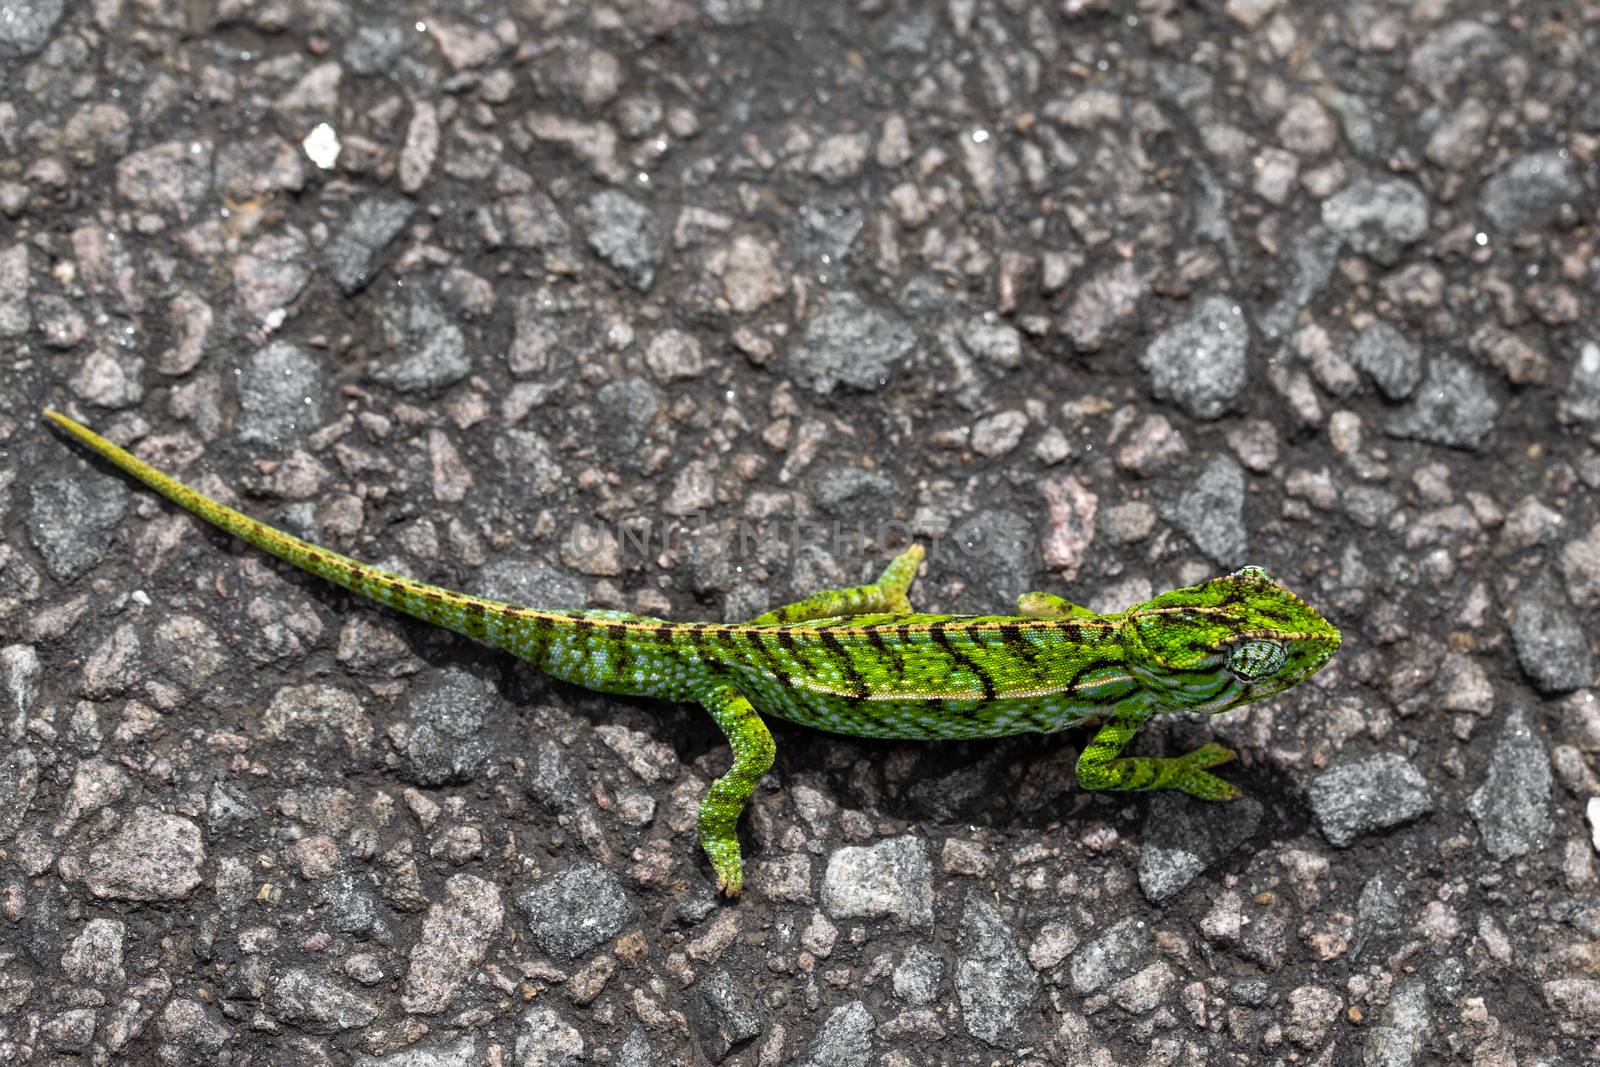 Close up of a green chameleon on the street by 25ehaag6